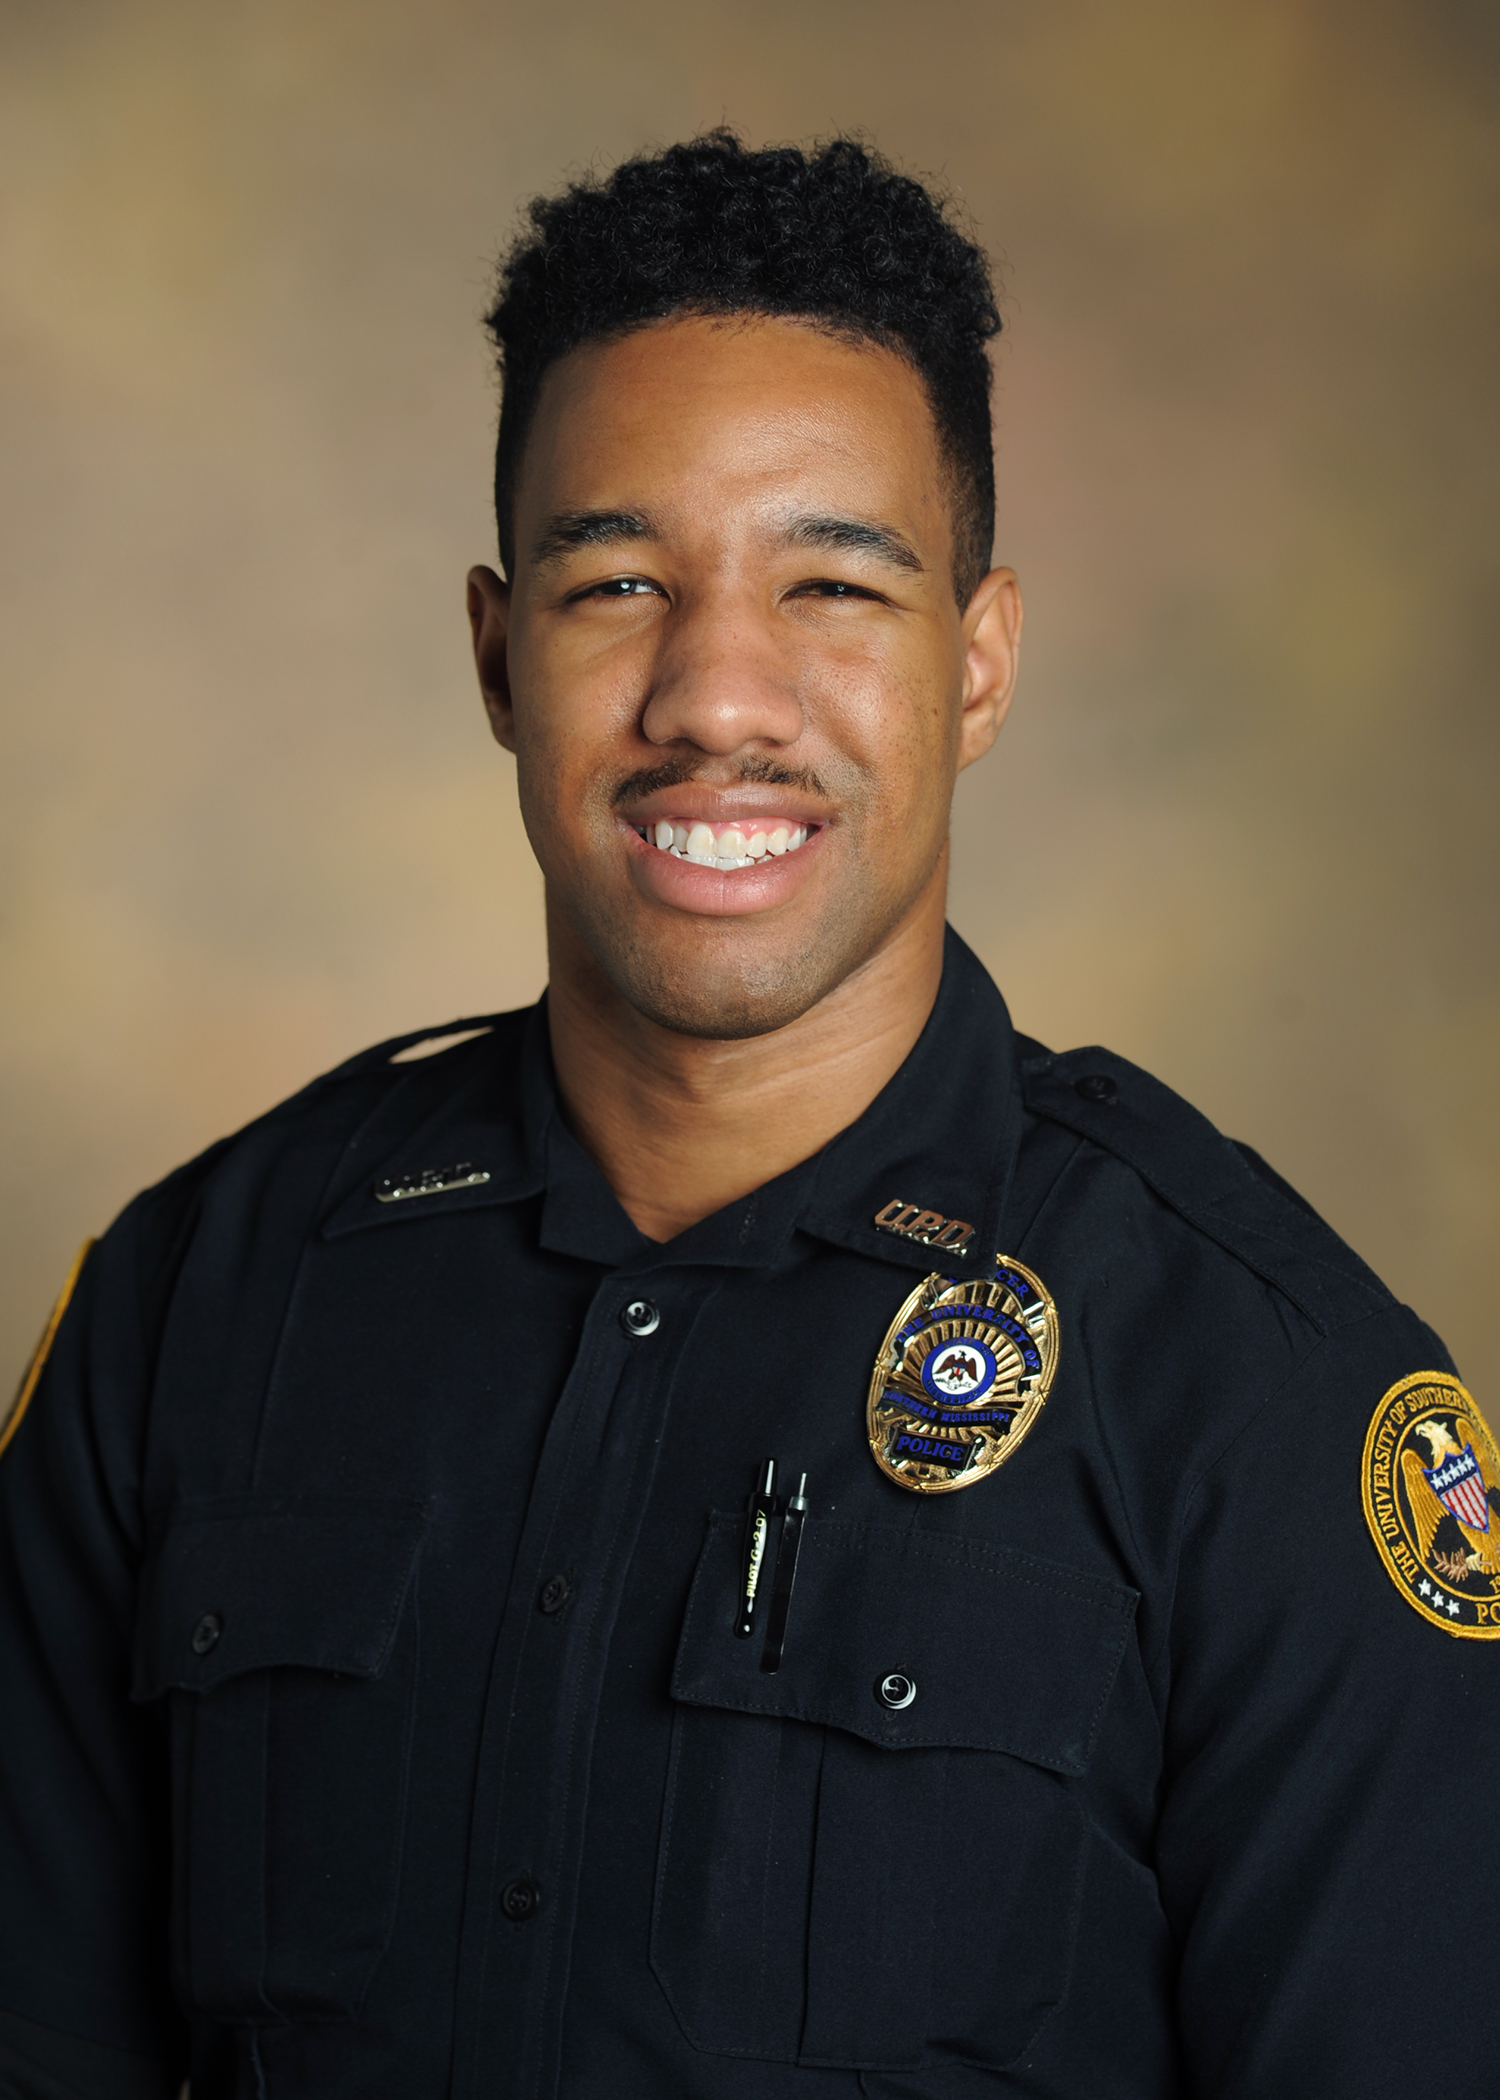 Officer Justus Smith